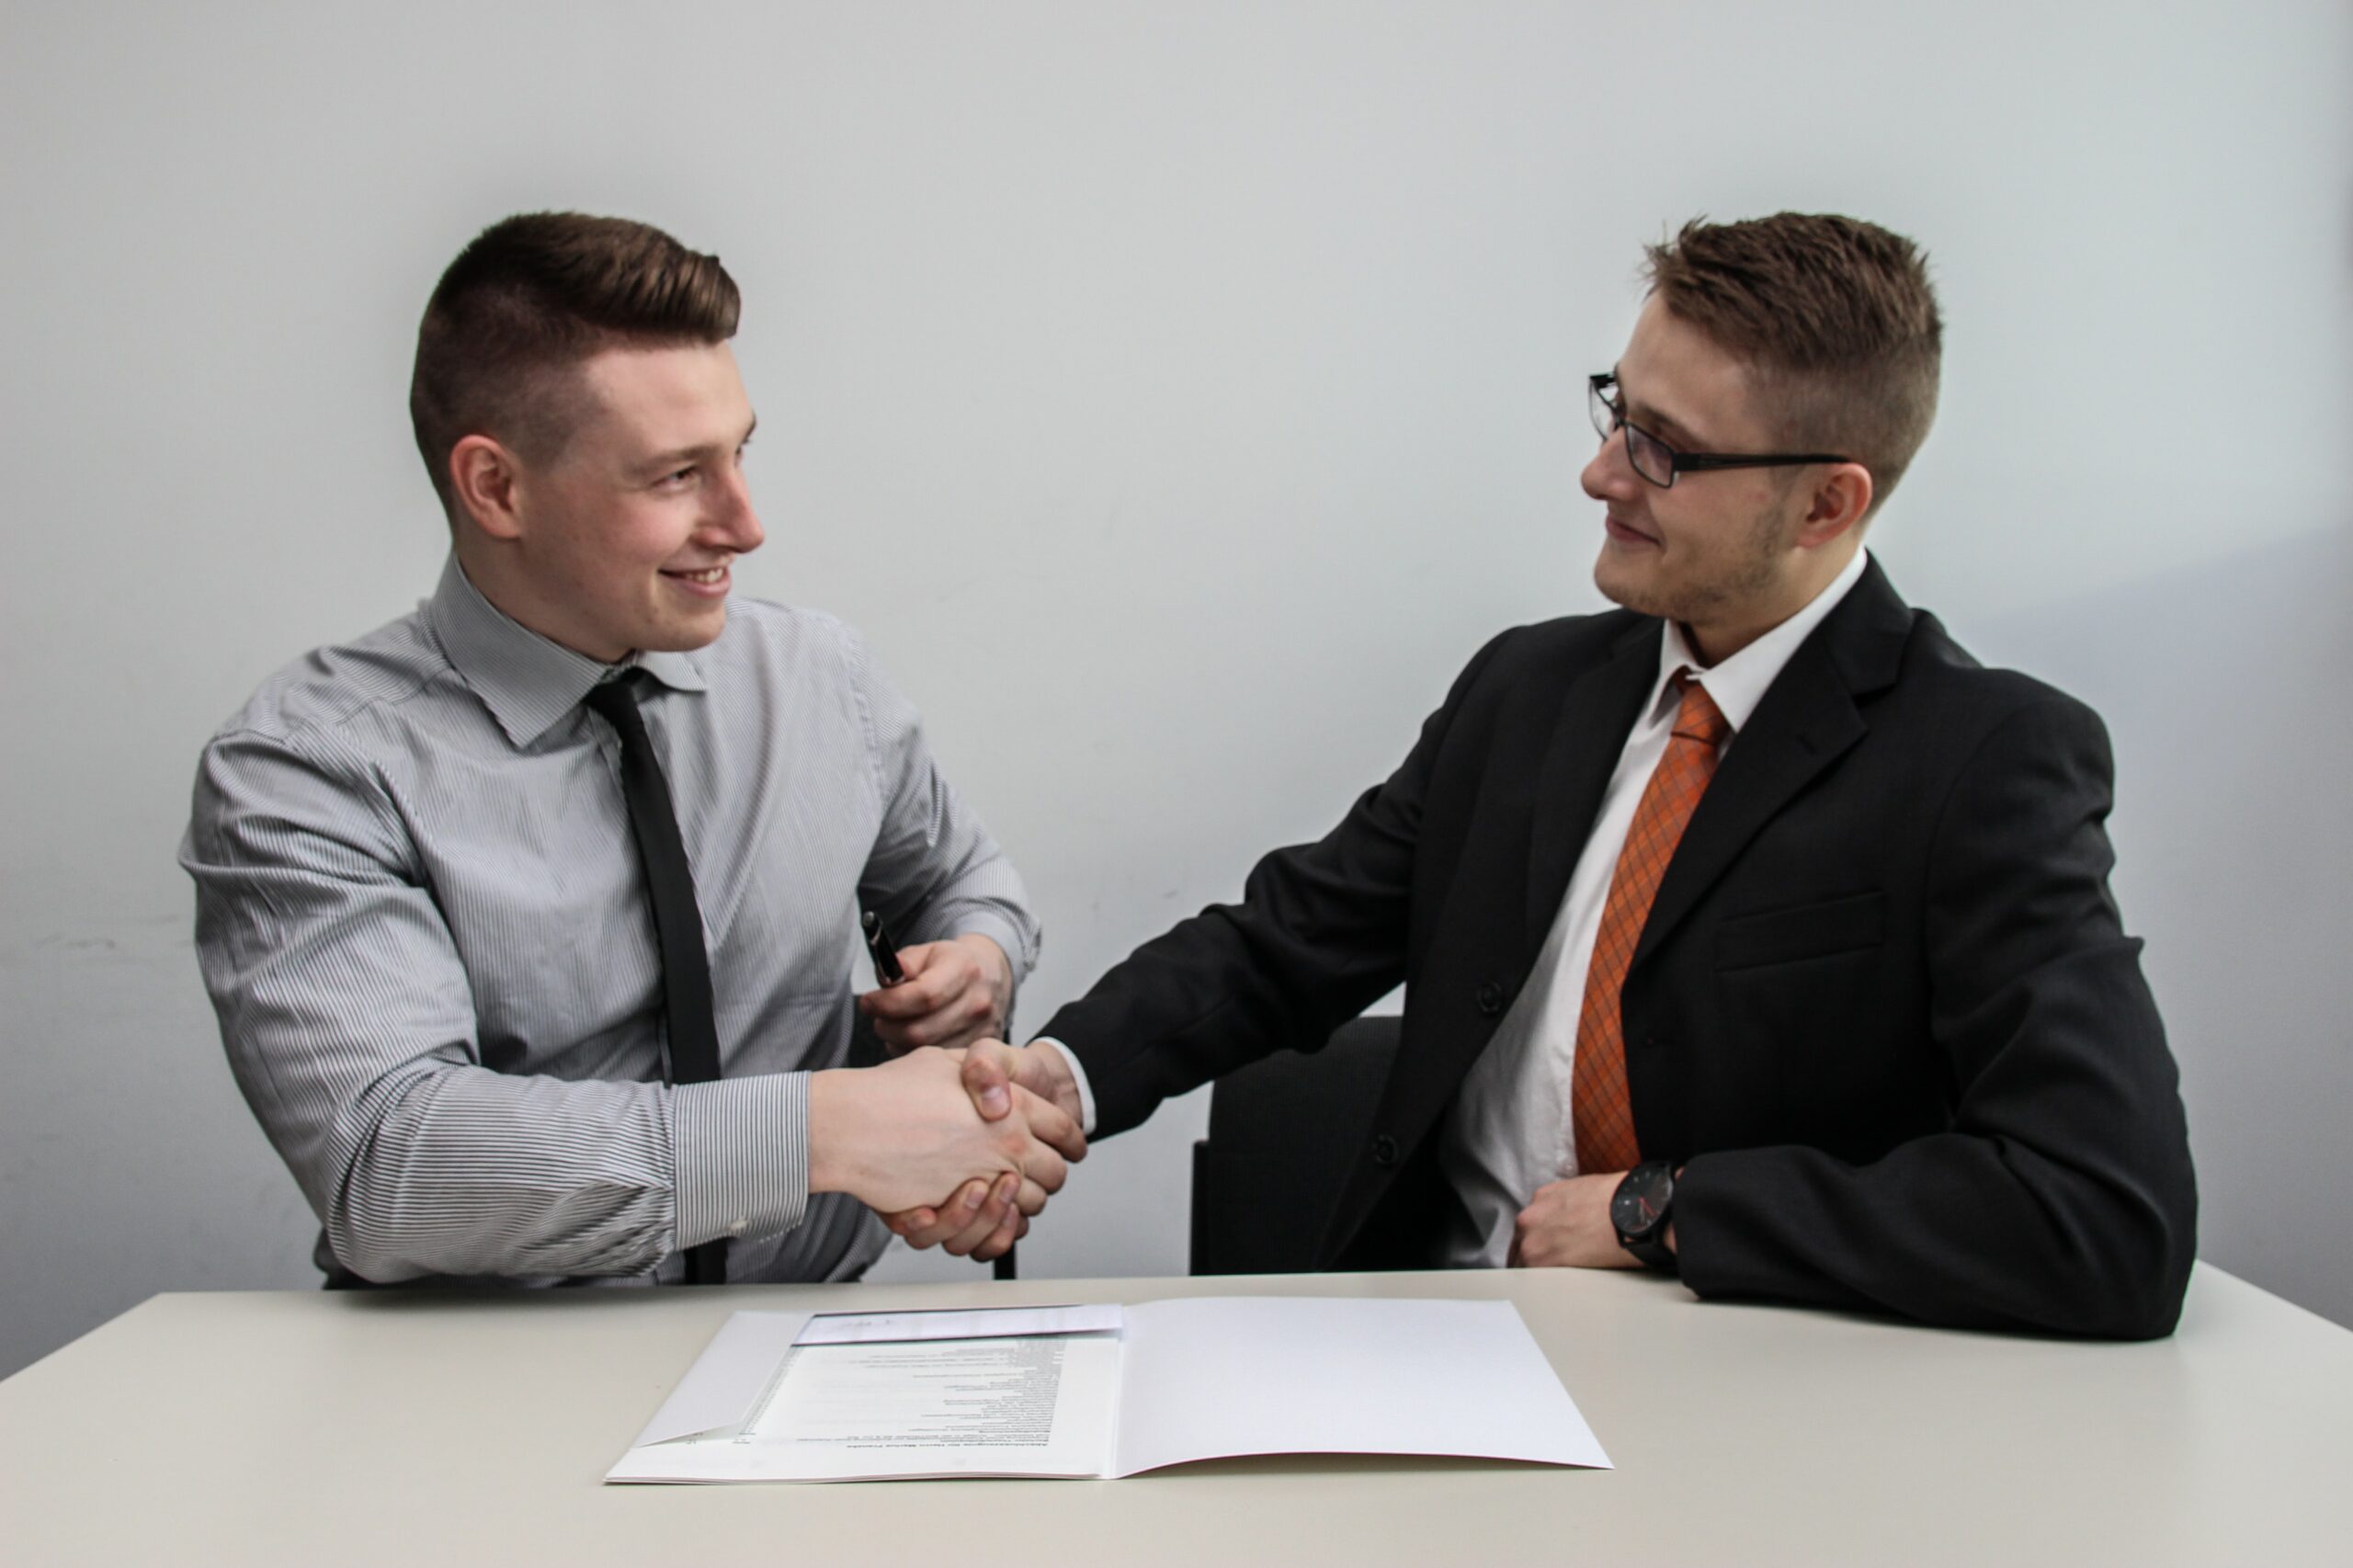 Two men shaking hands over some documents. bookkeeping interview questions